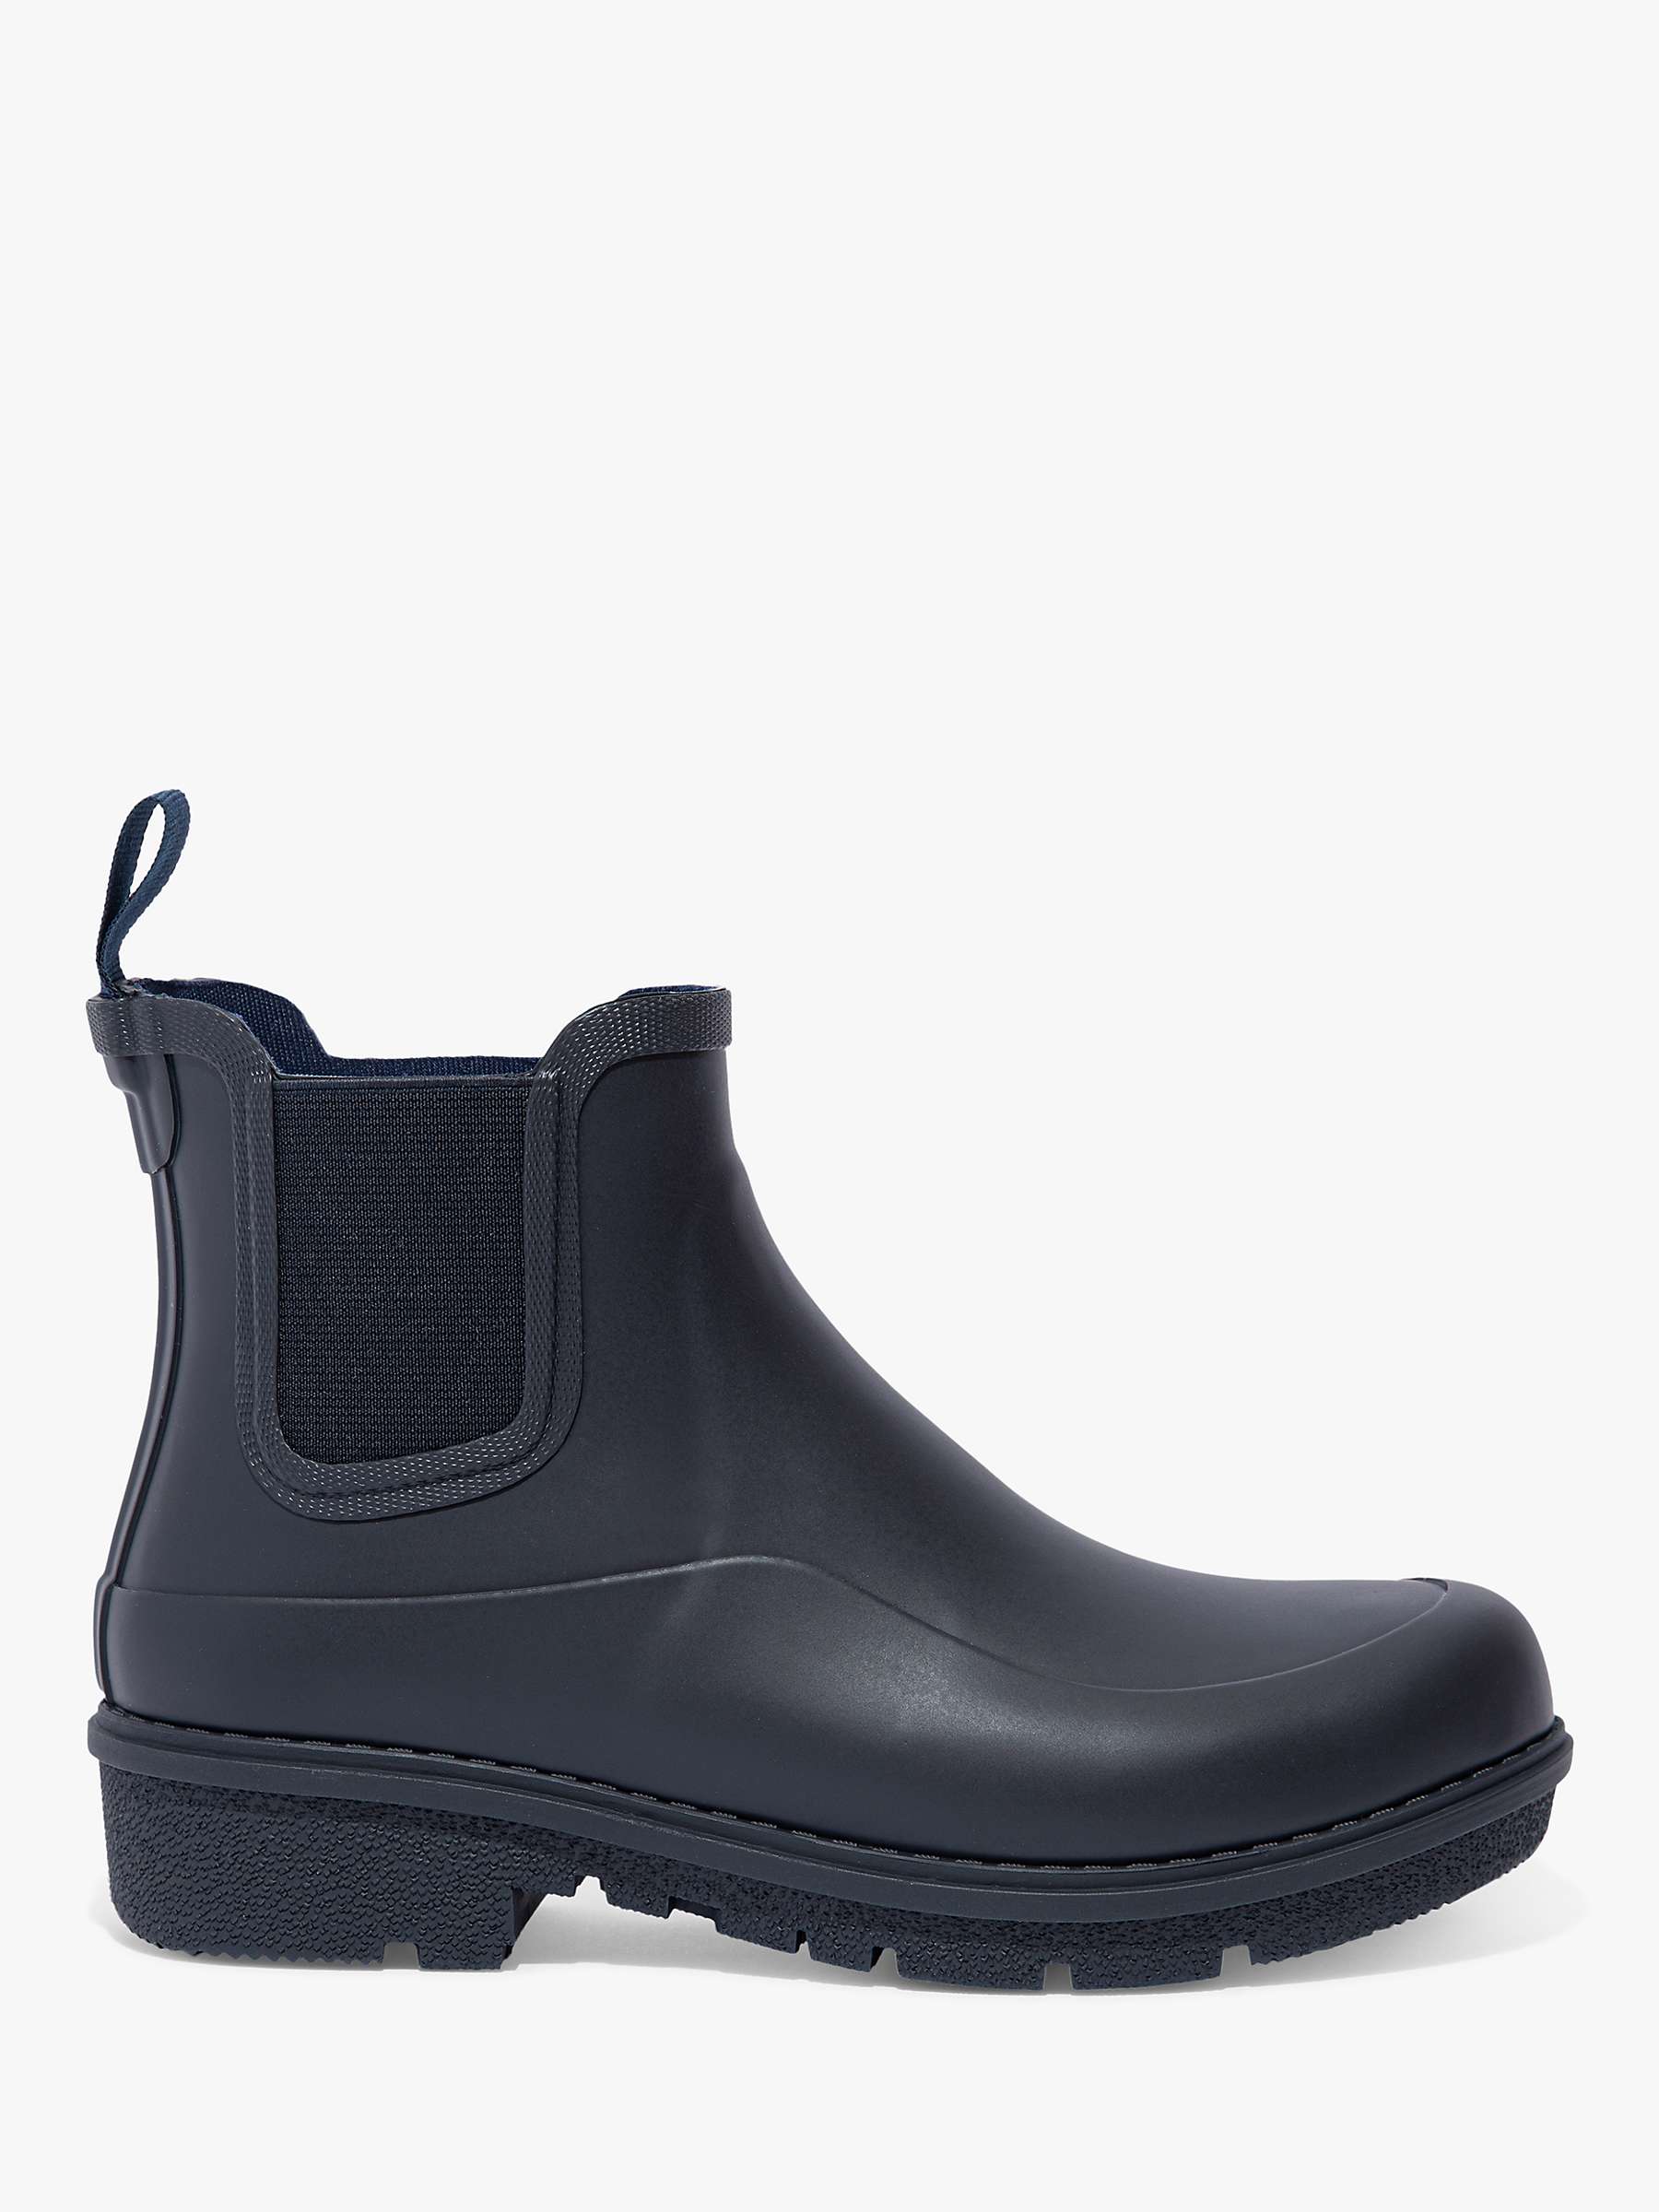 FitFlop WonderWelly Short Chelsea Wellington Boots, Midnight Navy at ...